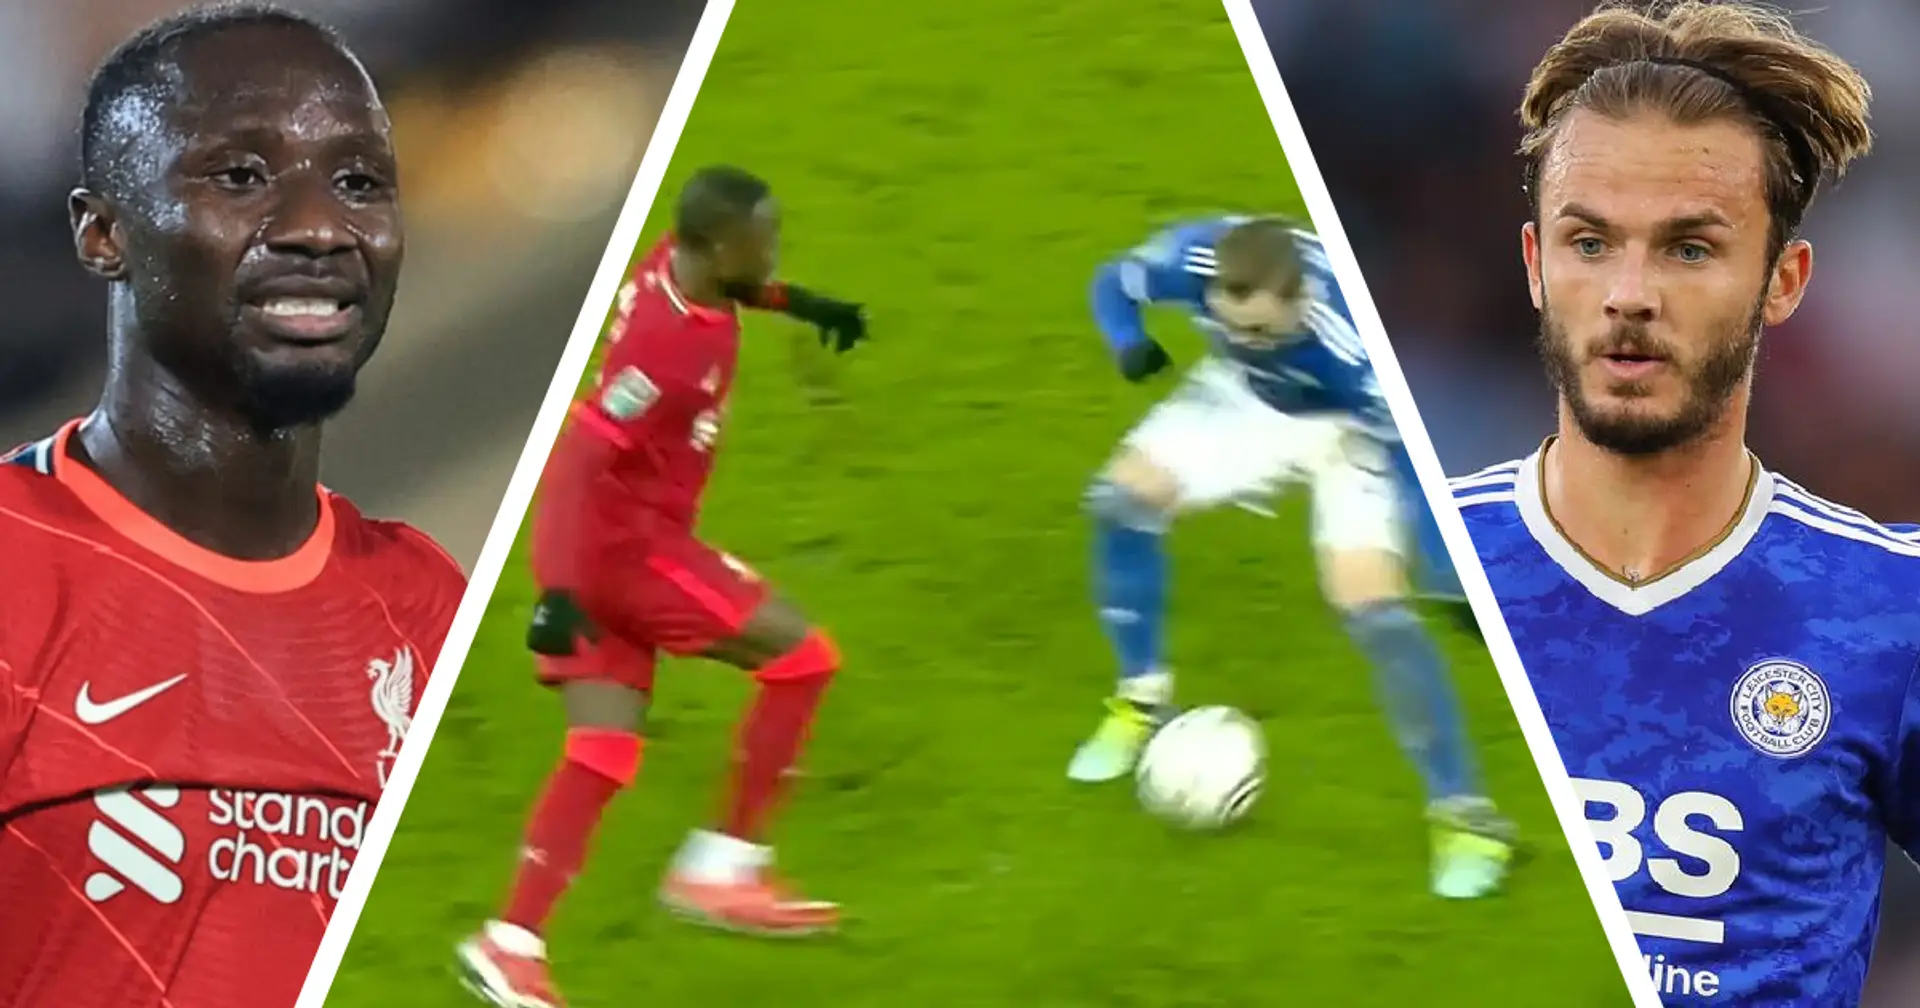 Spotted - Keita's filthy nutmeg on Maddison in Leicester win